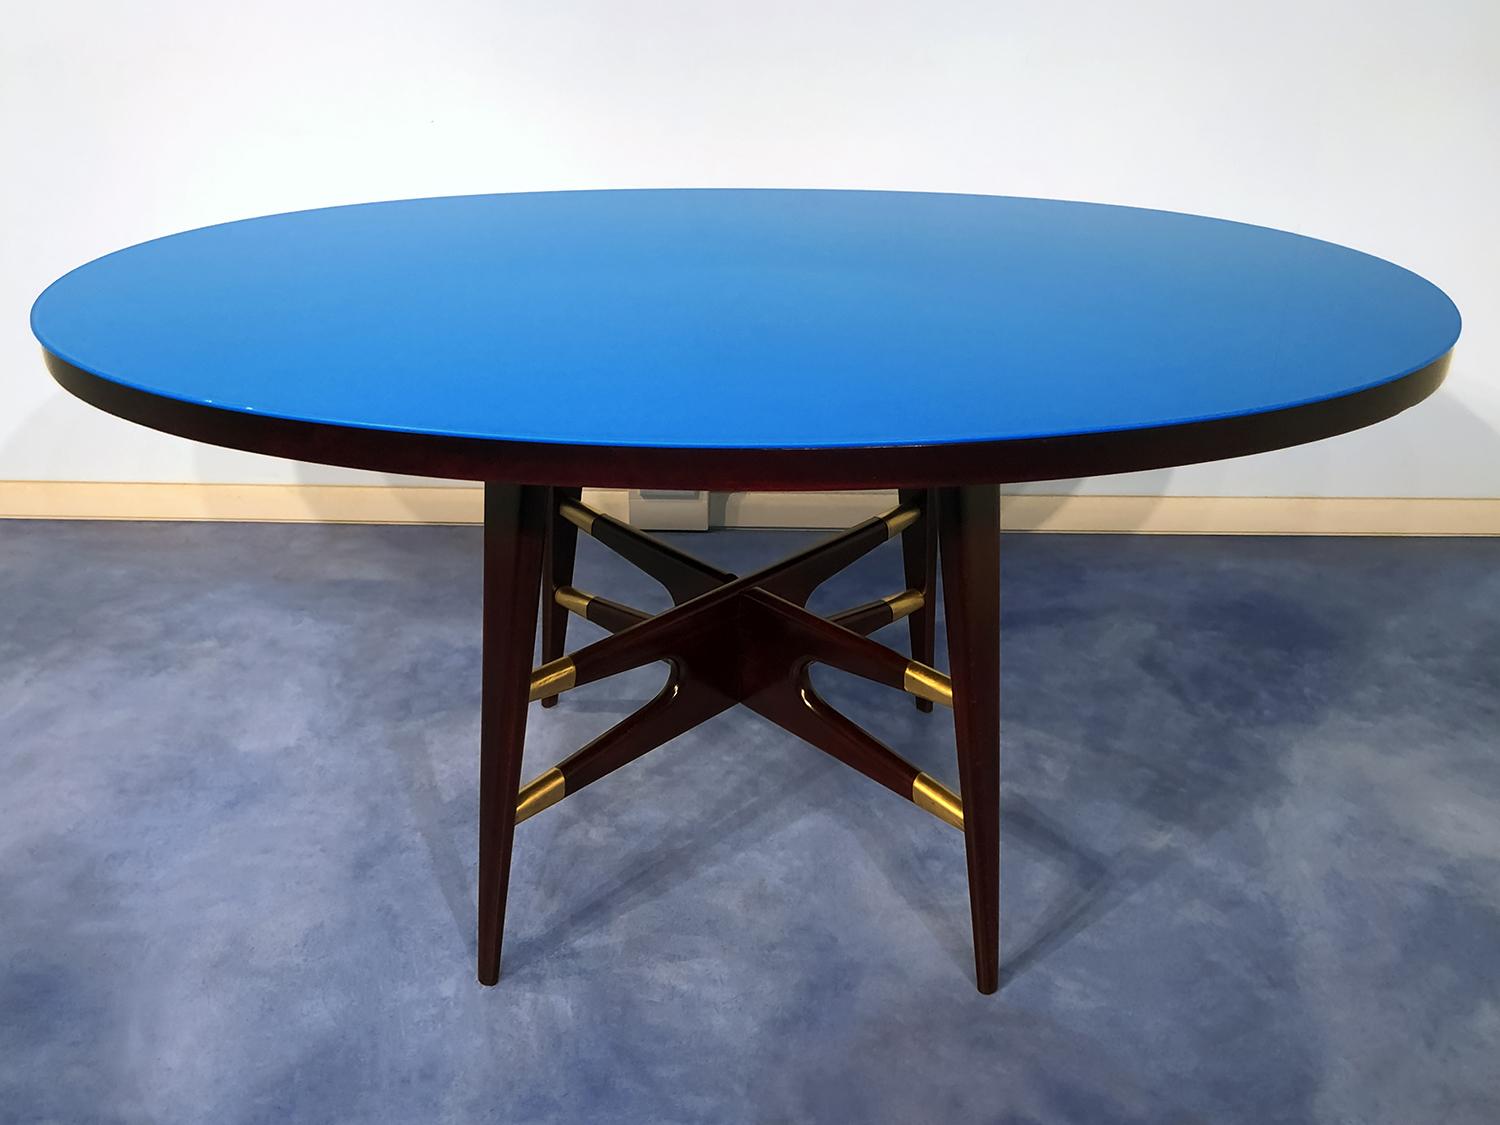 Stained Glass Italian Mid-Century Oval Blue Dining Table by Silvio Cavatorta, 1950s